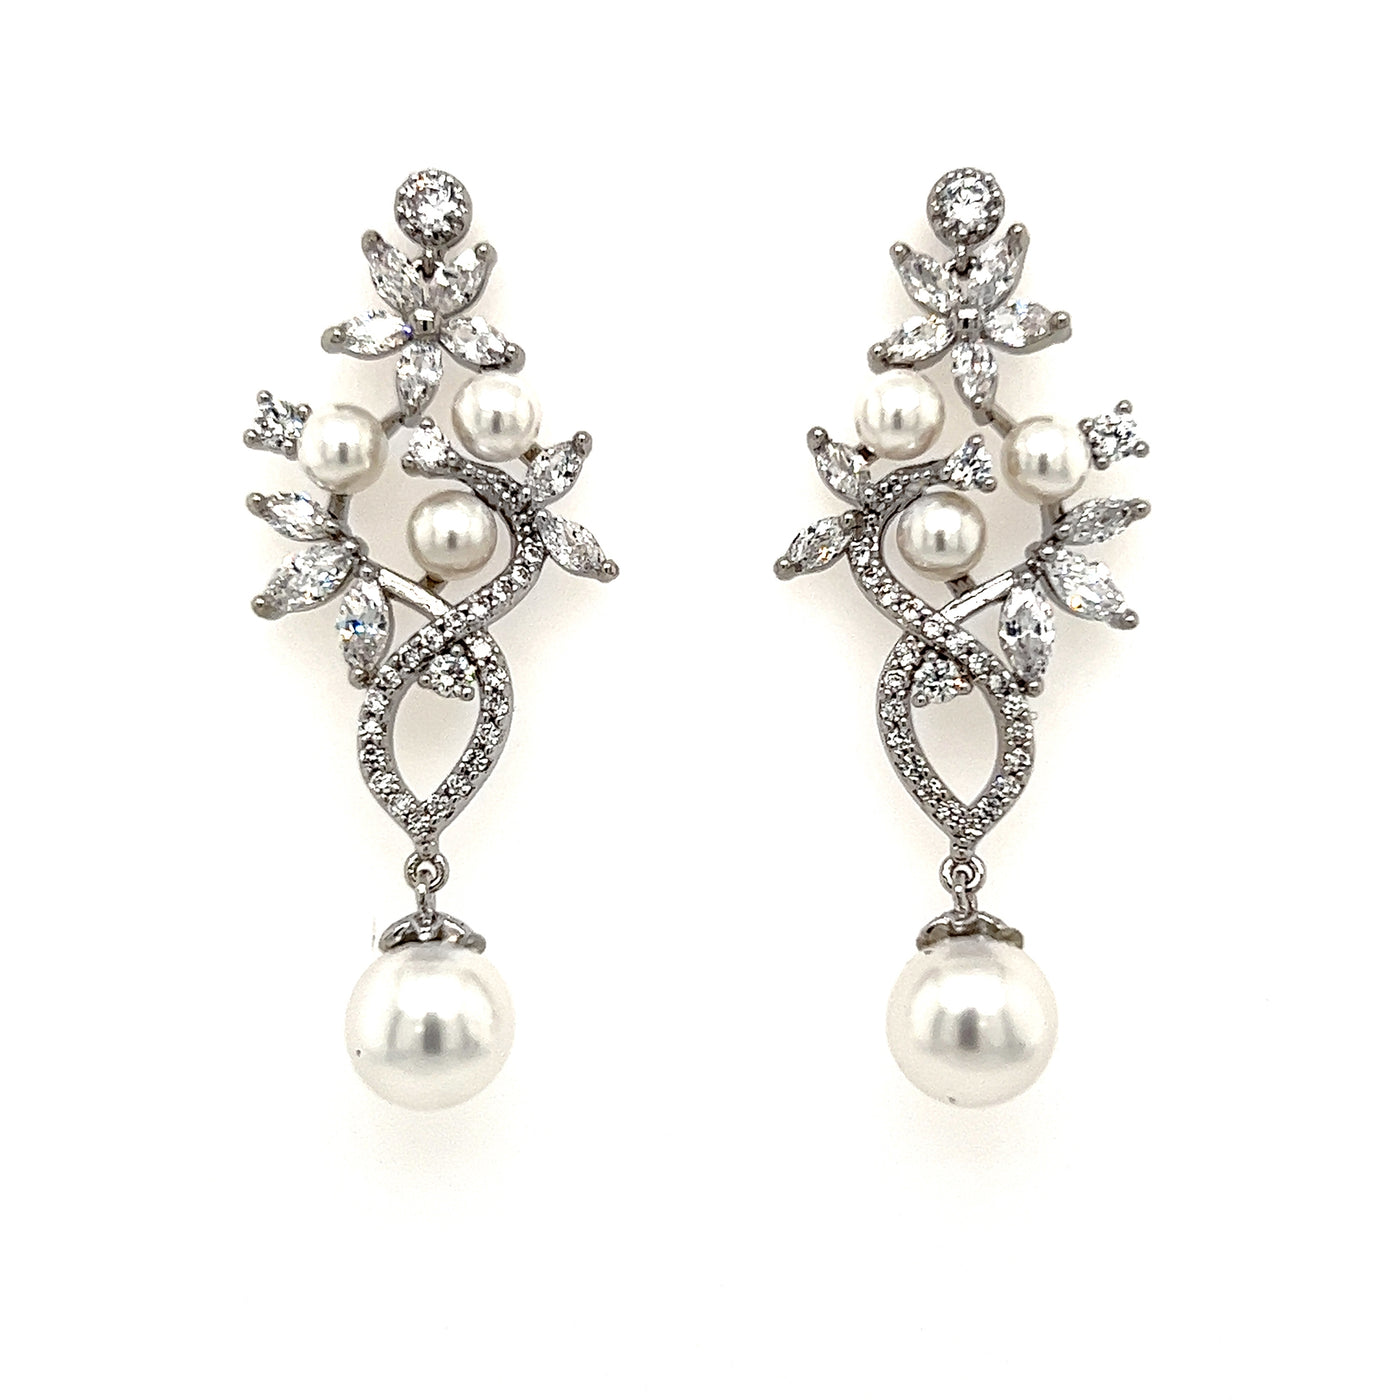 Vintage Inspired CZ and Pearl Earrings - Earing for your wedding